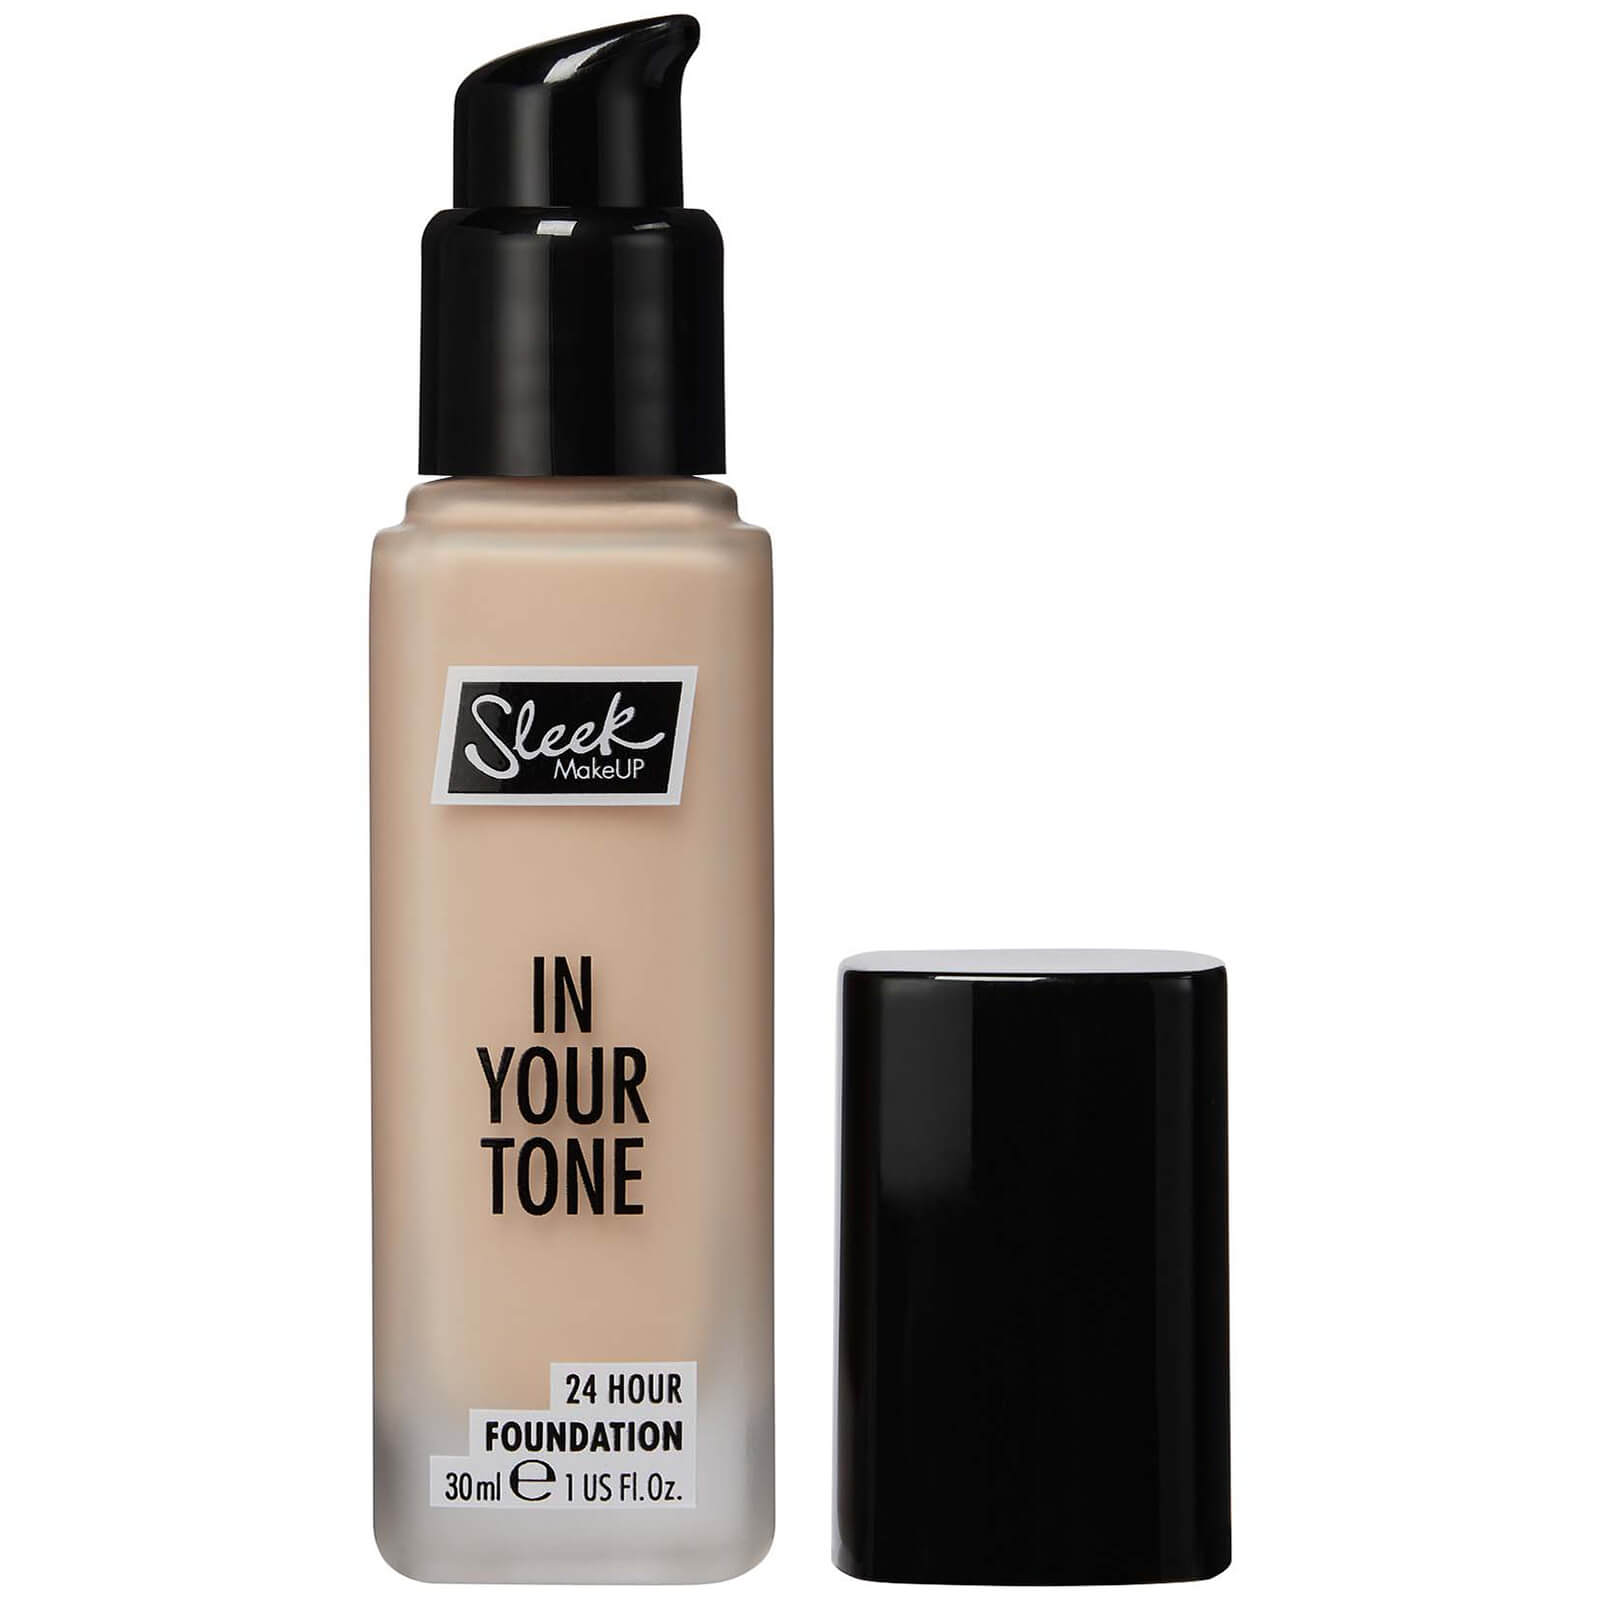 Sleek MakeUP in Your Tone 24 Hour Foundation 30ml (Various Shades) - 3C